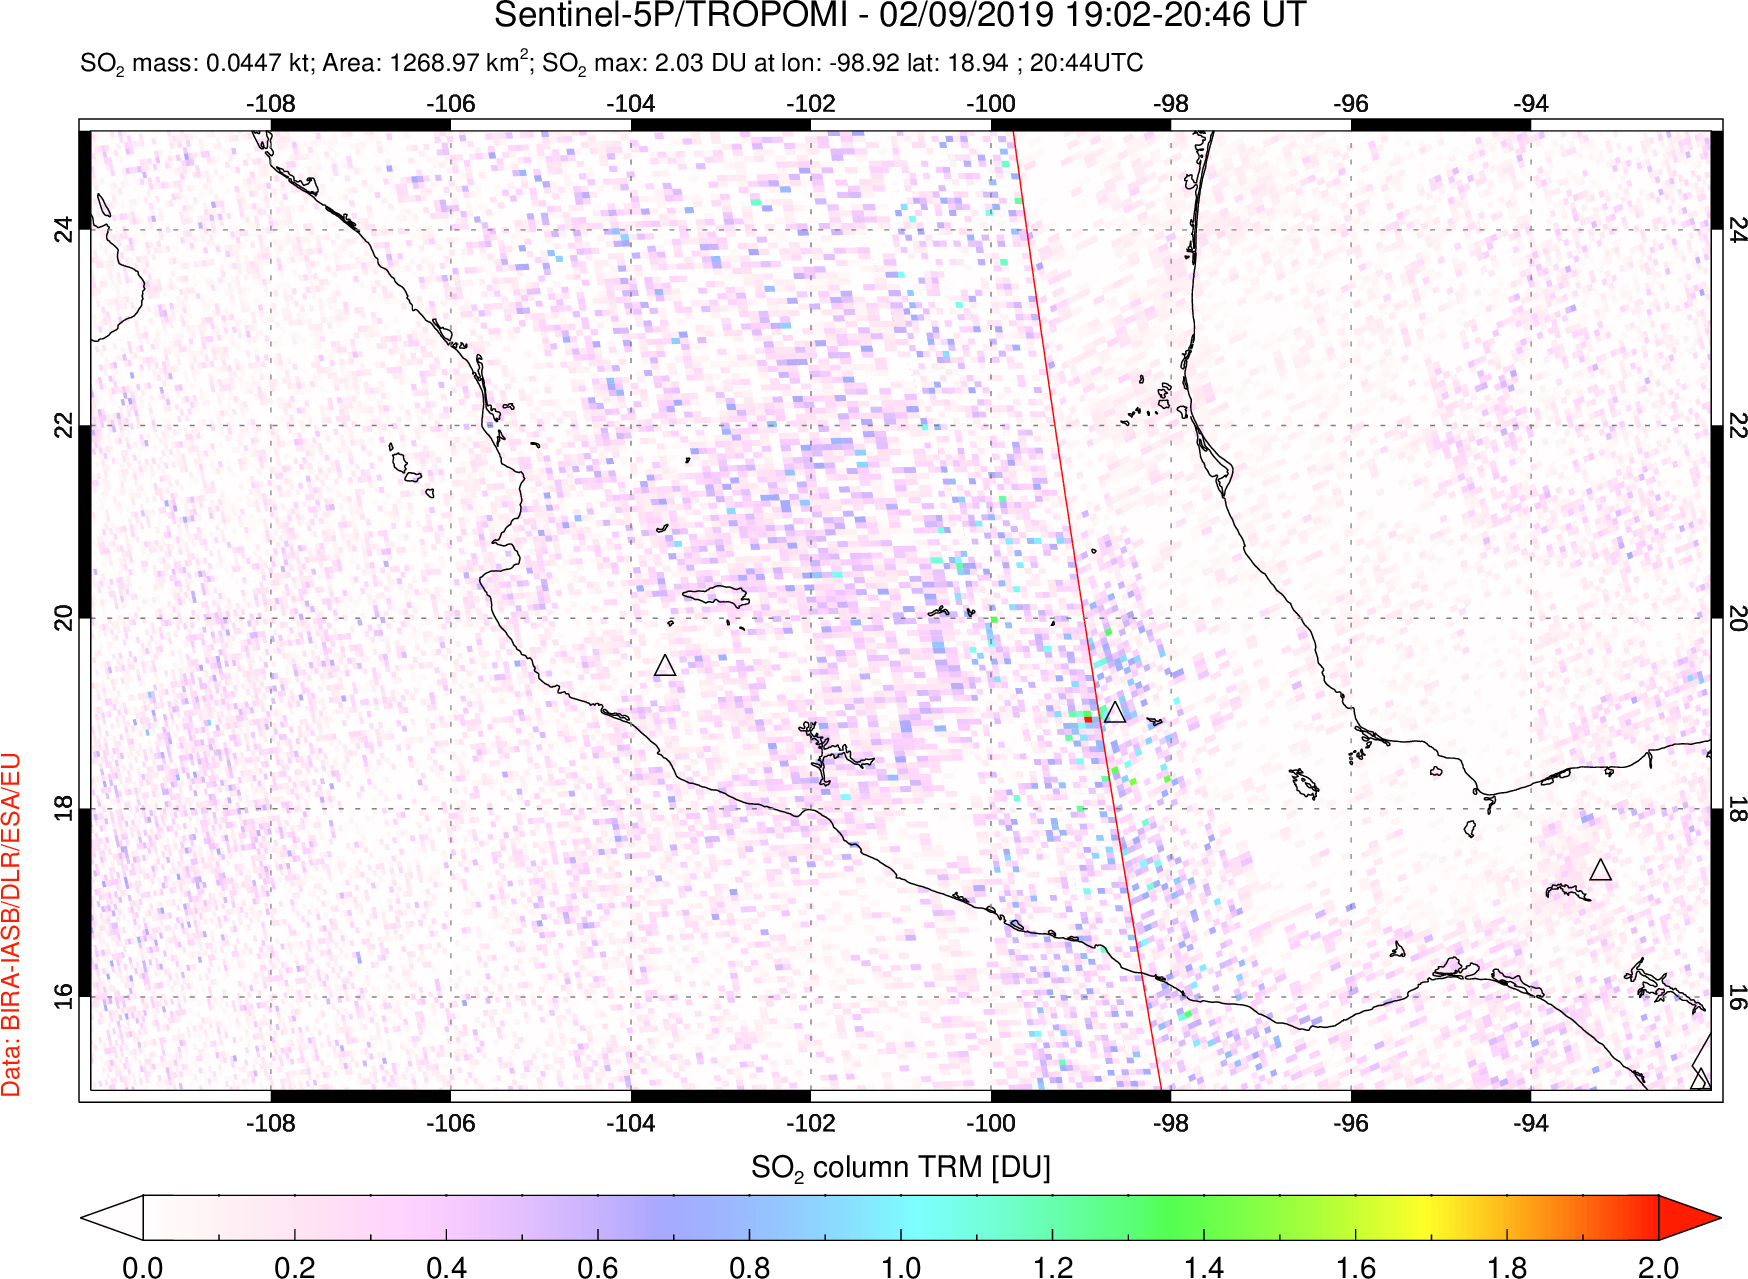 A sulfur dioxide image over Mexico on Feb 09, 2019.